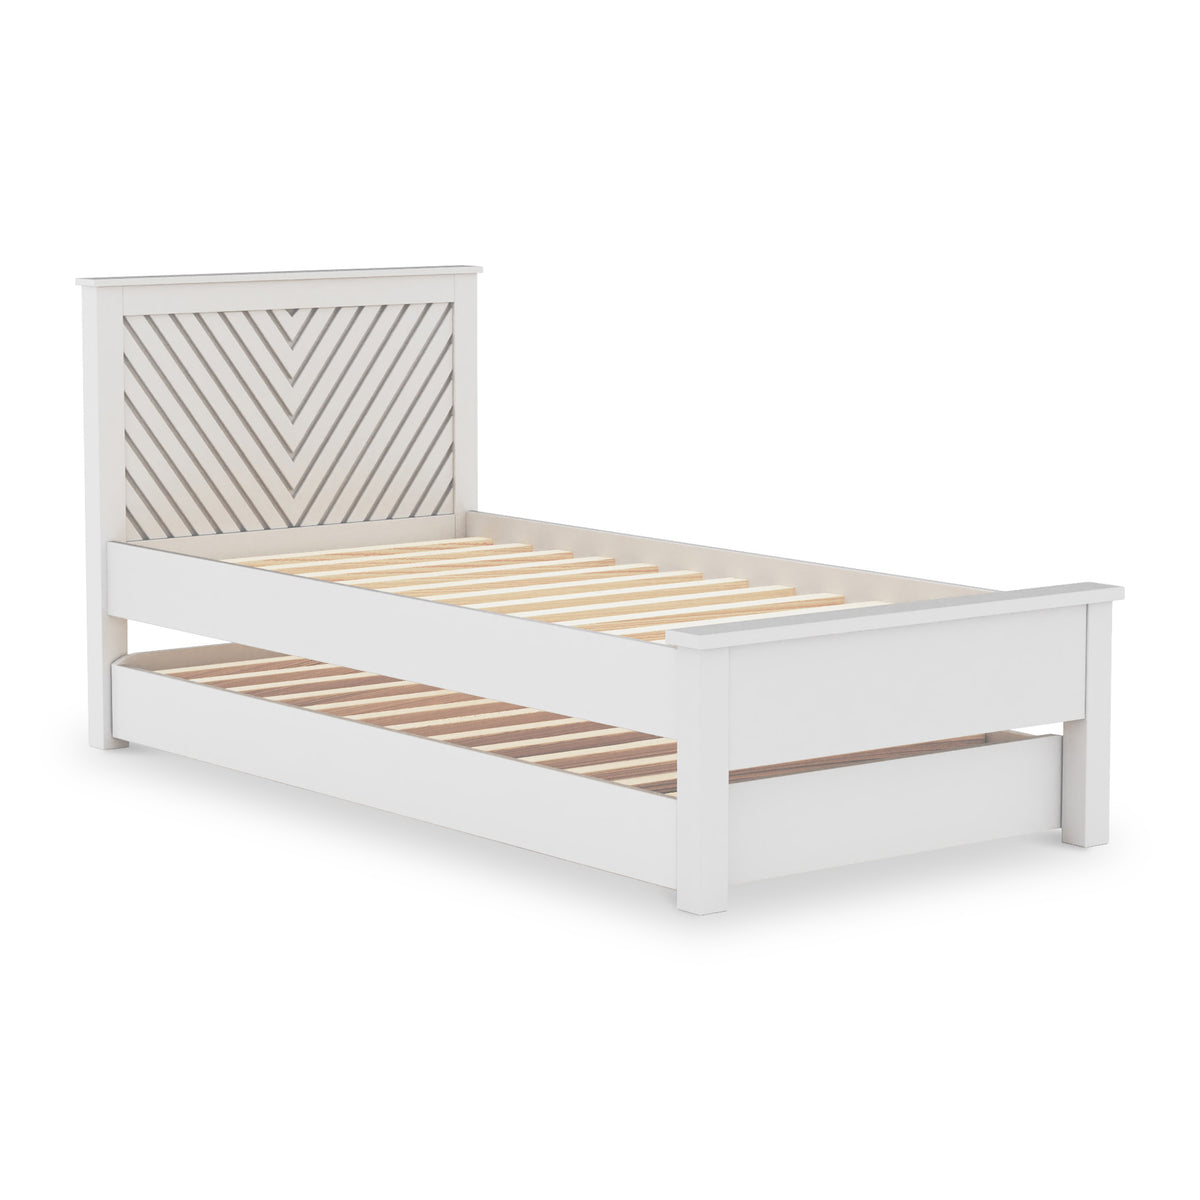 Wotton Chevron Guest or Kids Bed with Trundle